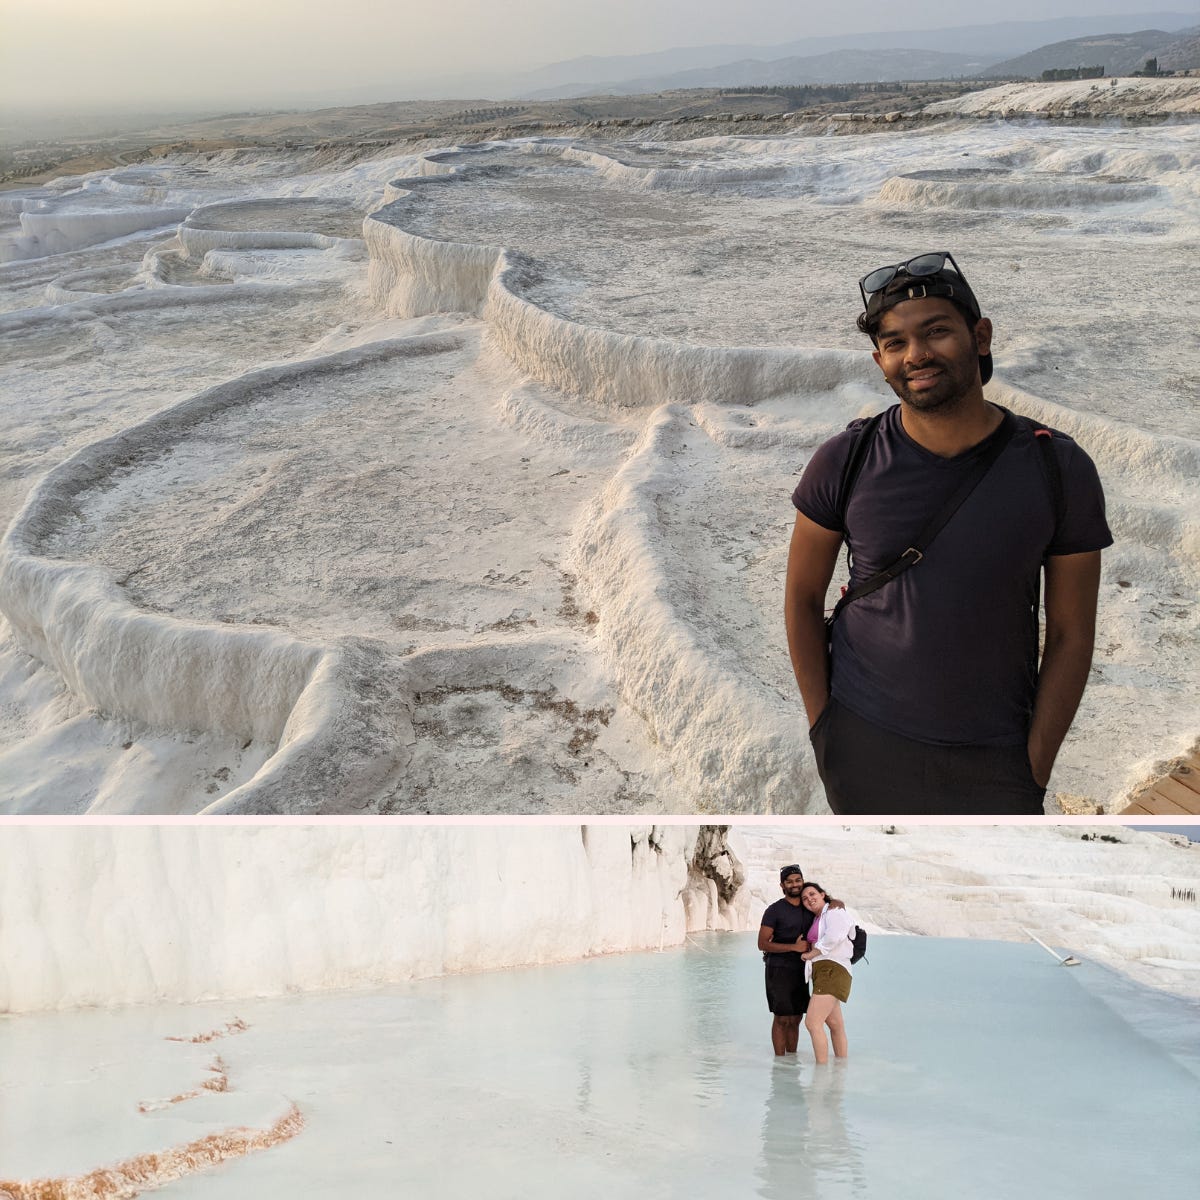 Two pictures: (top) Aseef standing before three layers of cascading dry limestone terraces; (bottom) Aseef and Iulia standing closely, ankle-deep in blue-green mineral water.